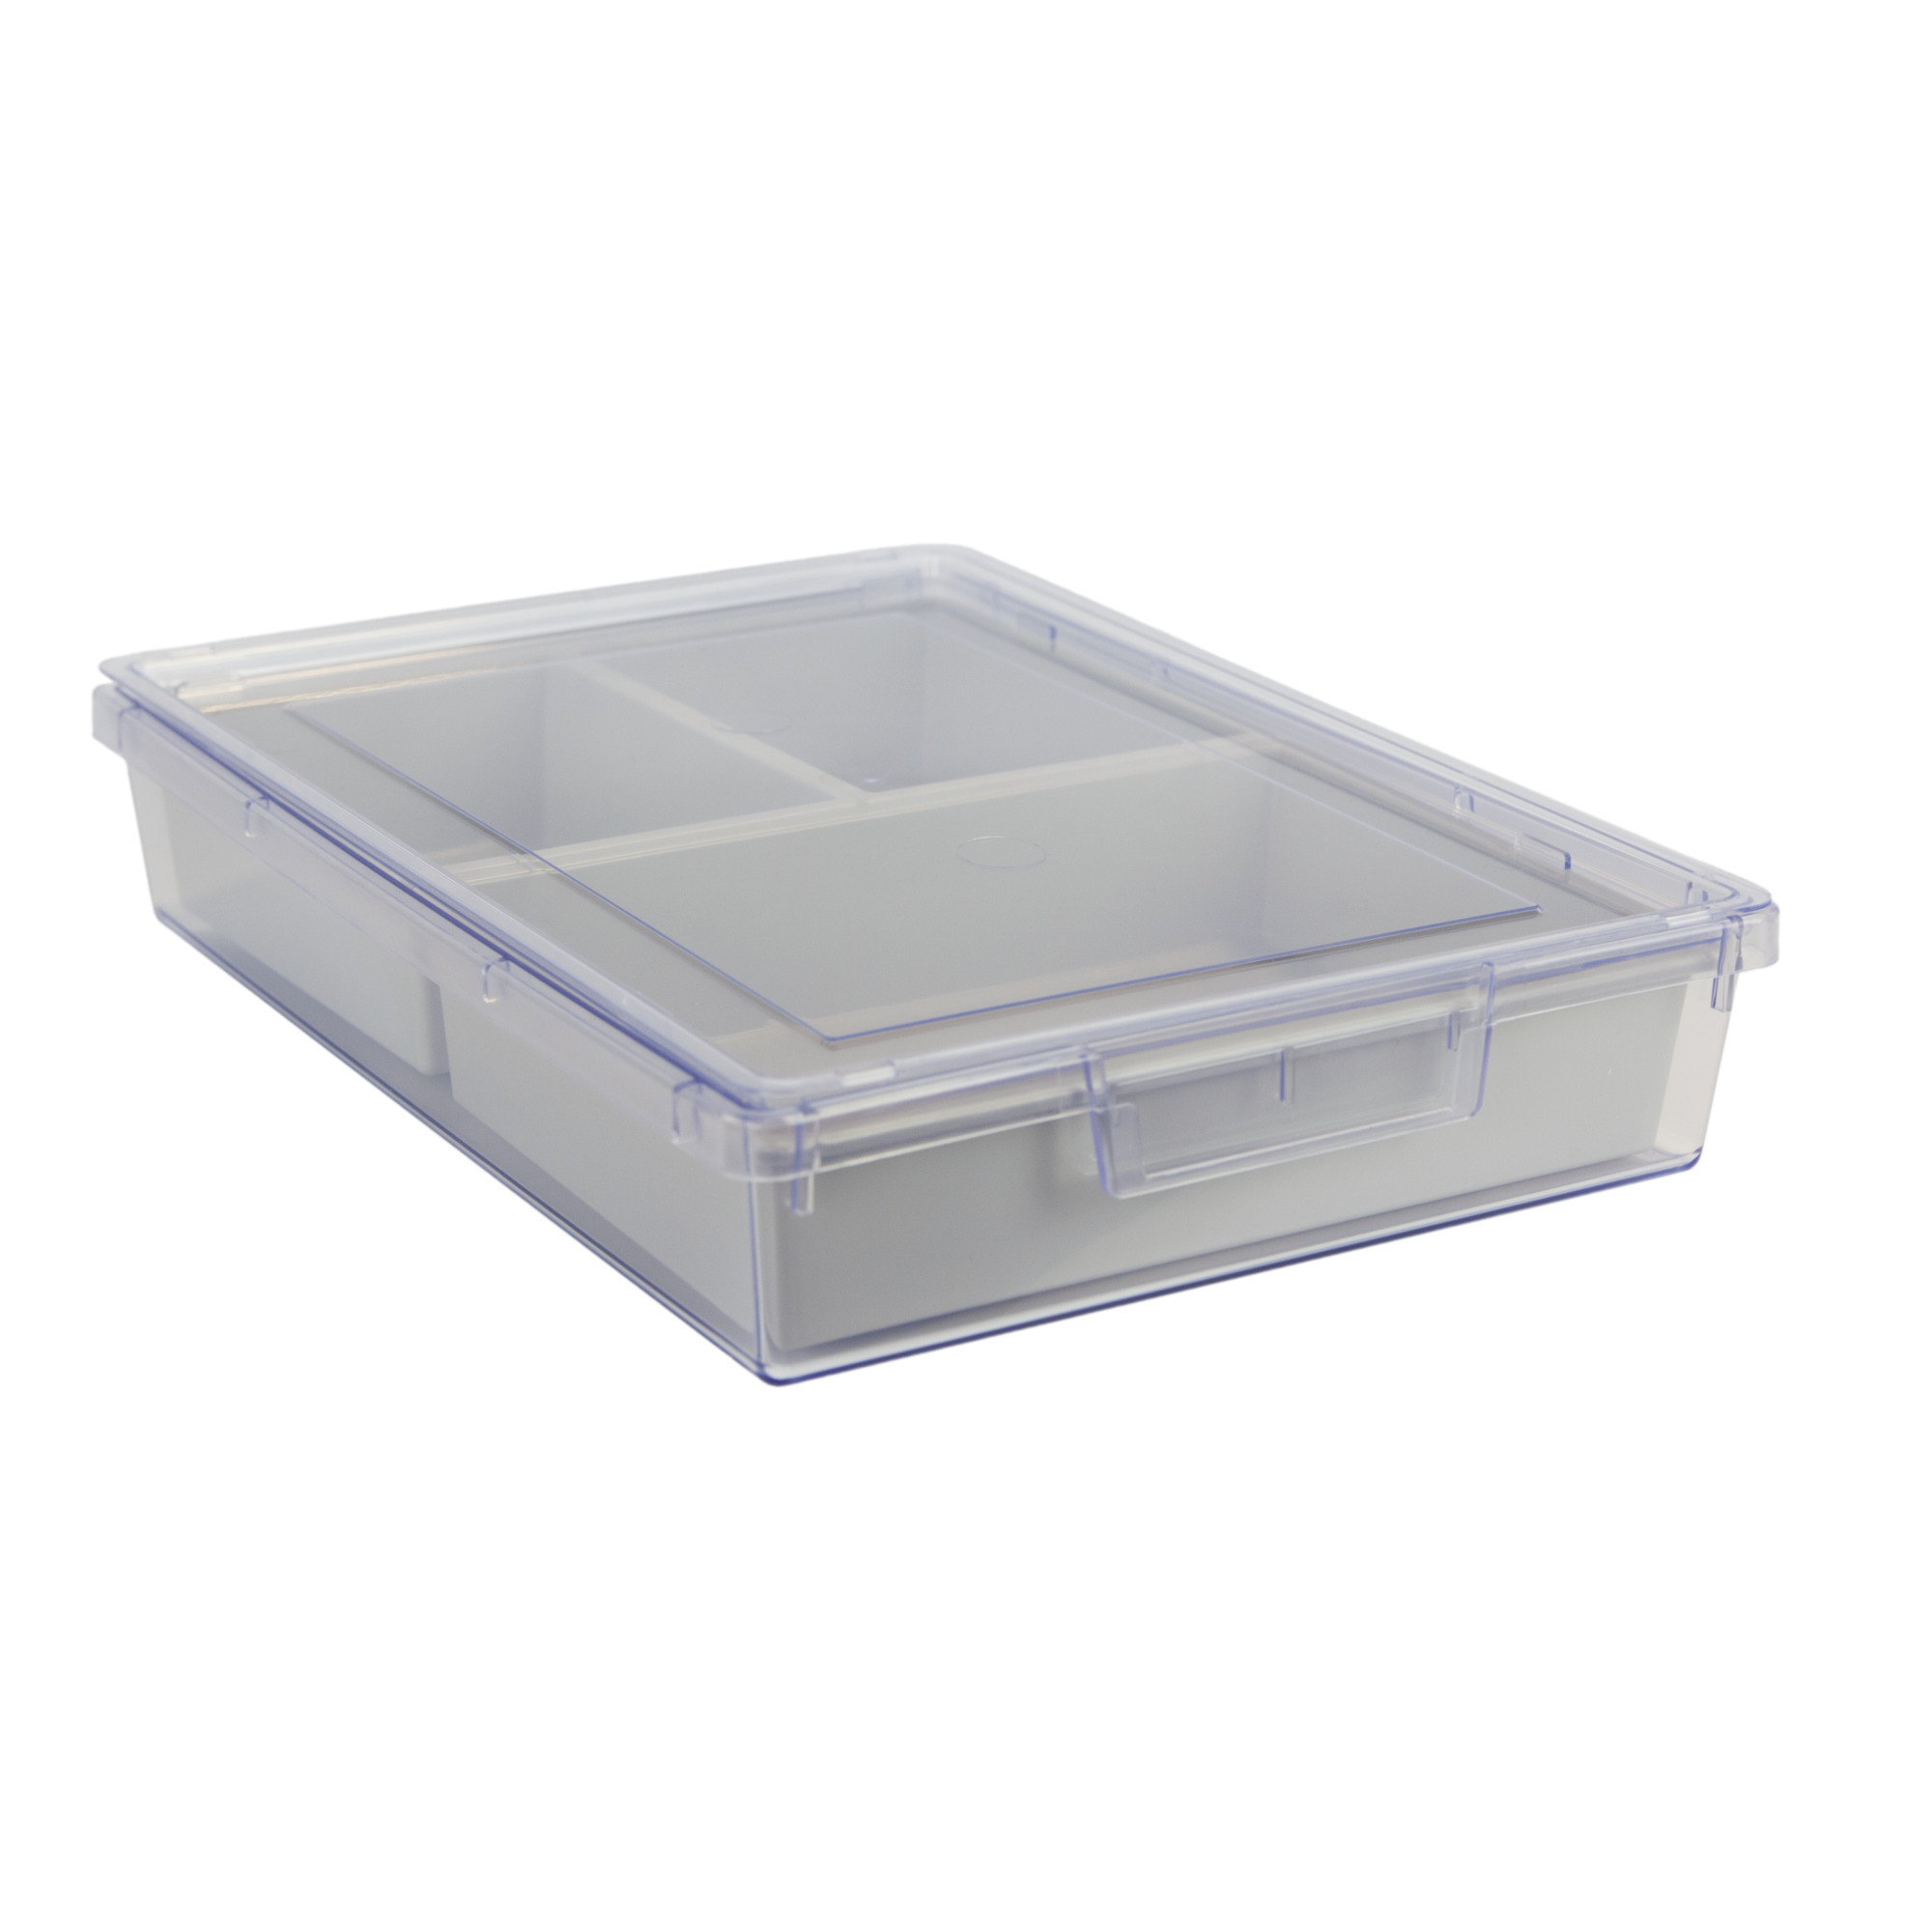 Certwood StorWerks, Slim Line 3Inch Tray Kit (3 x Divisions) Clear, Included (qty.) 1, Material Plastic, Height 9 in, Model CE1950CL-NK0004-1